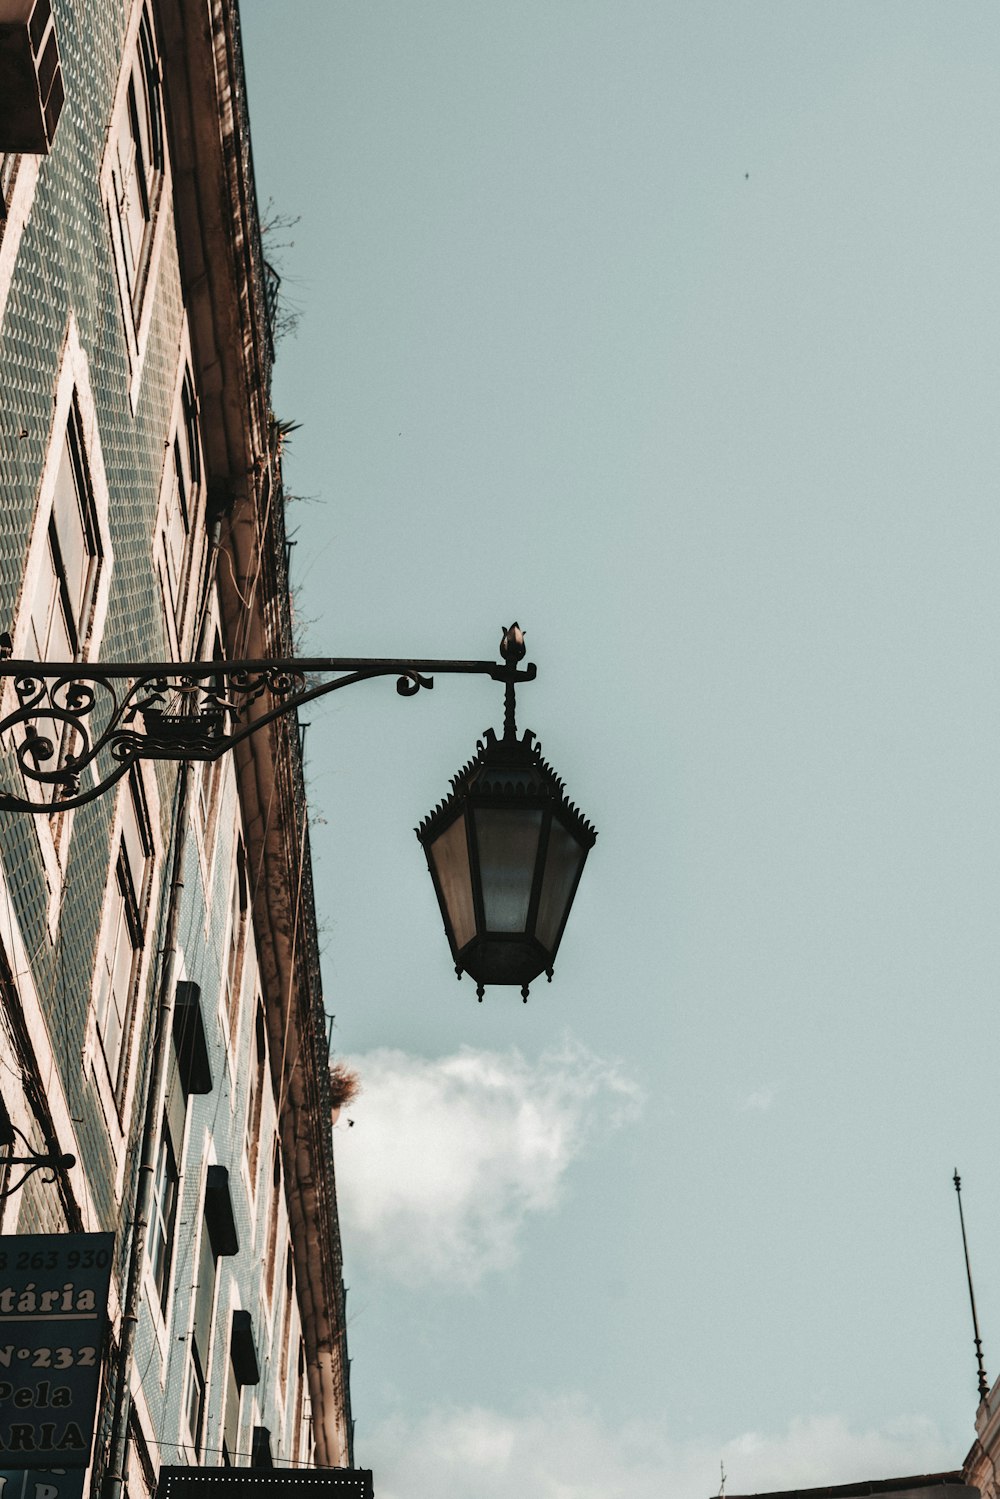 a street light hanging from the side of a building